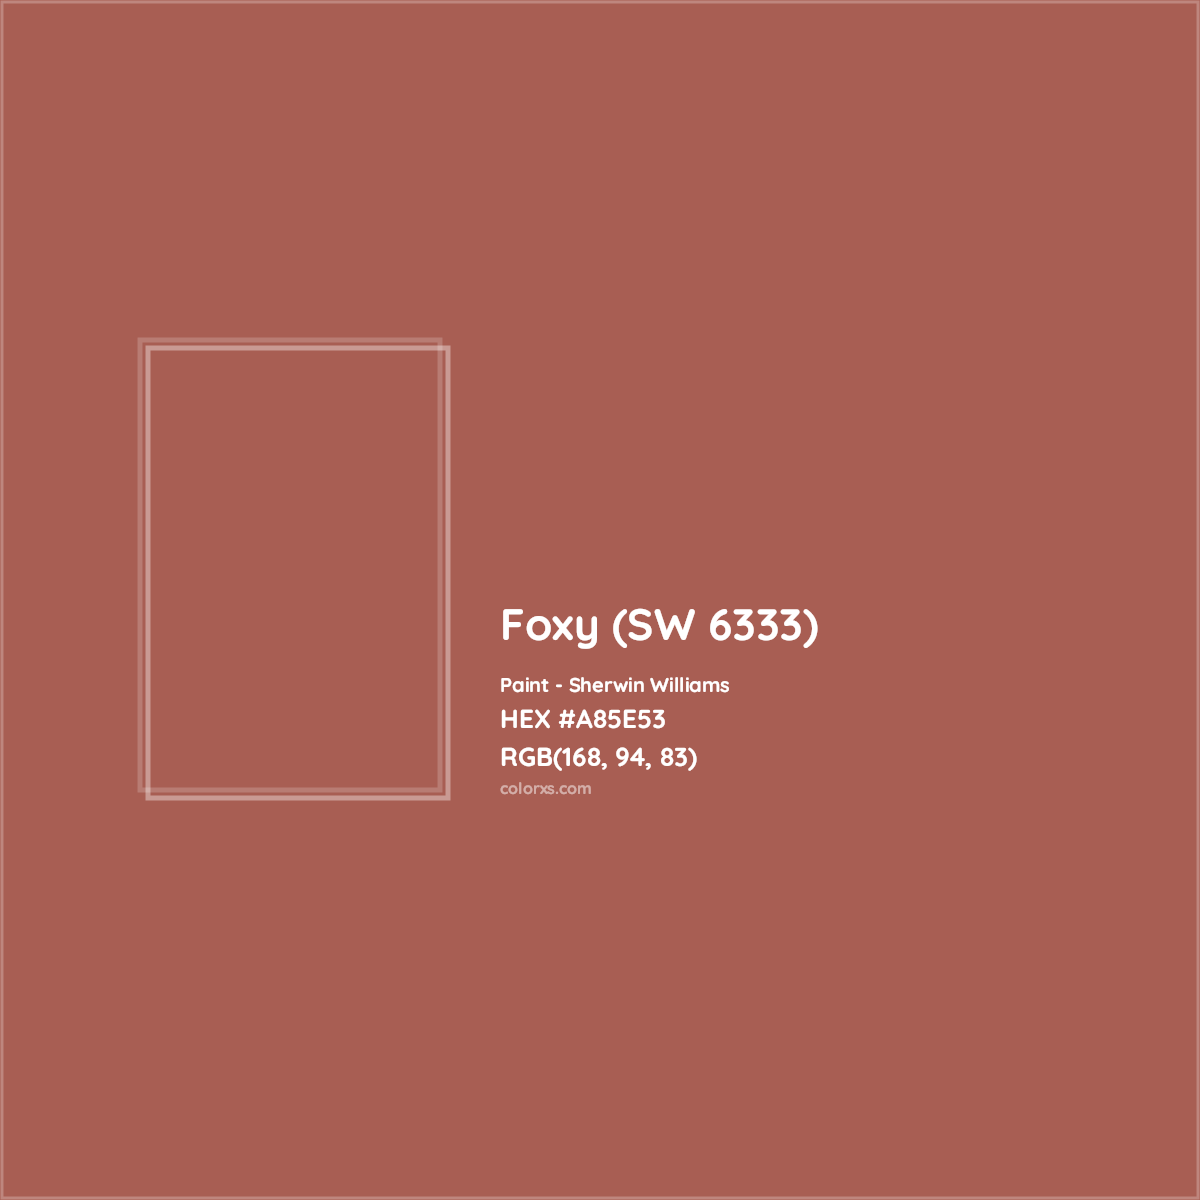 HEX #A85E53 Foxy (SW 6333) Paint Sherwin Williams - Color Code